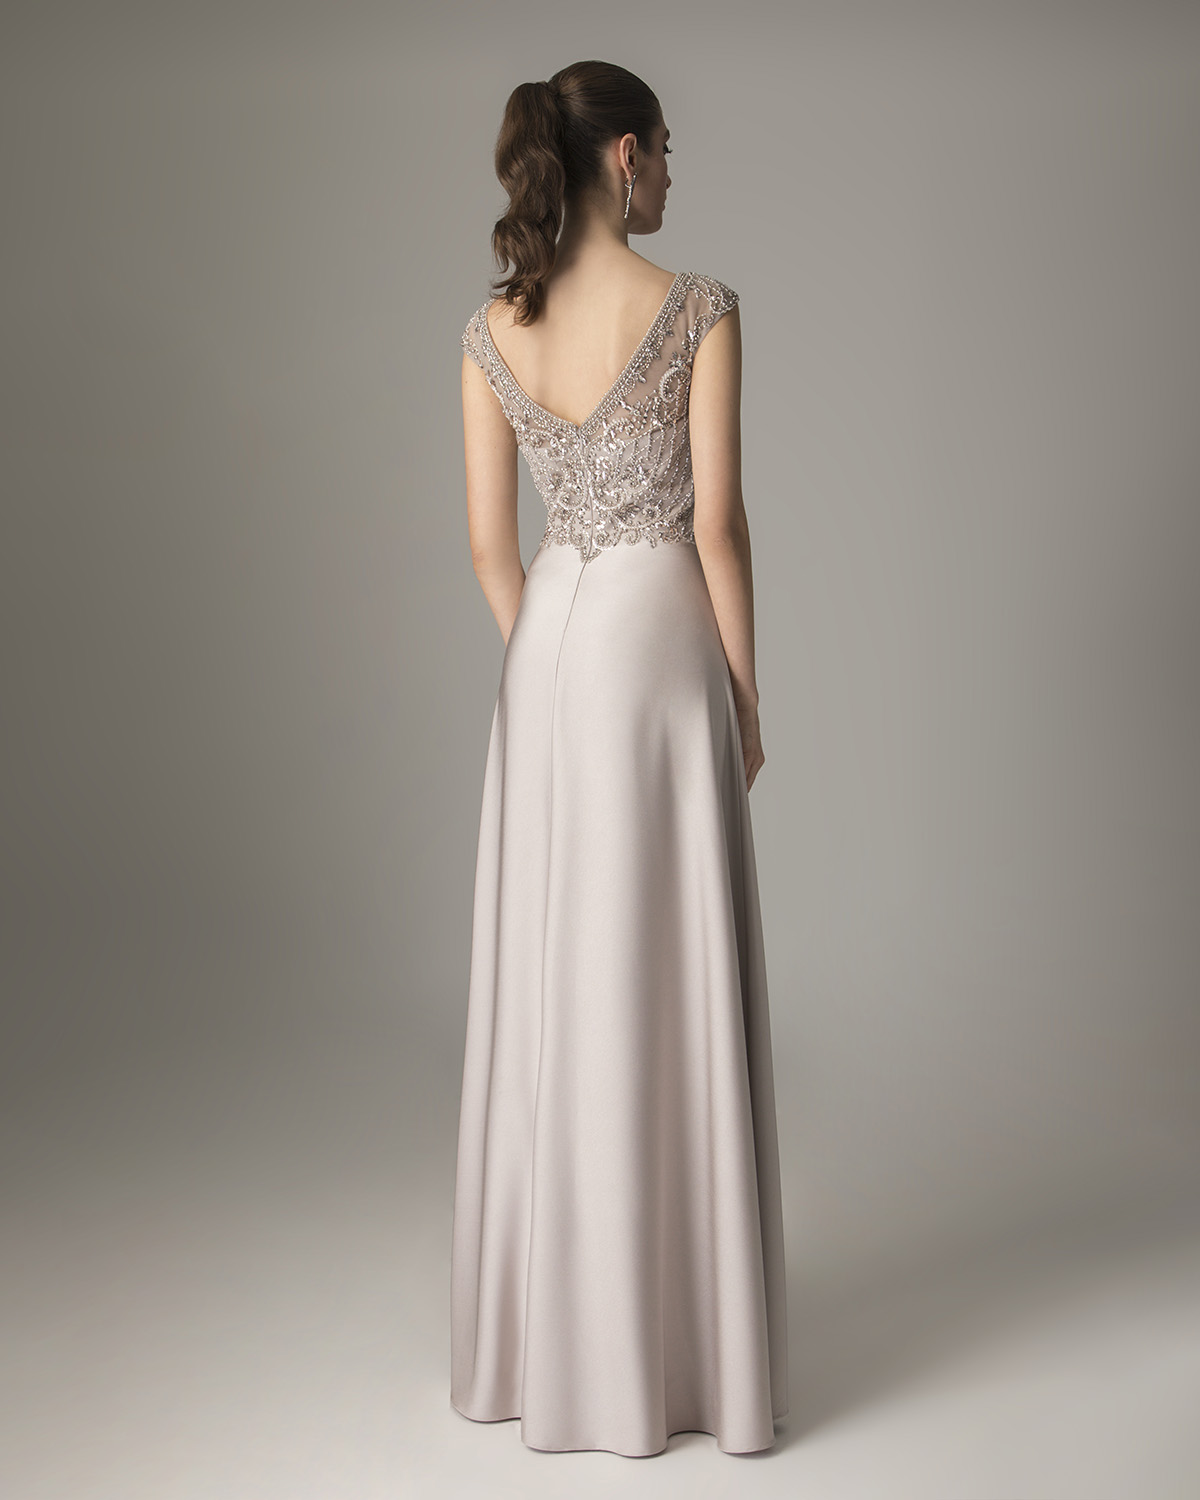 Classic Dresses / Long satin dress with fully beaded top